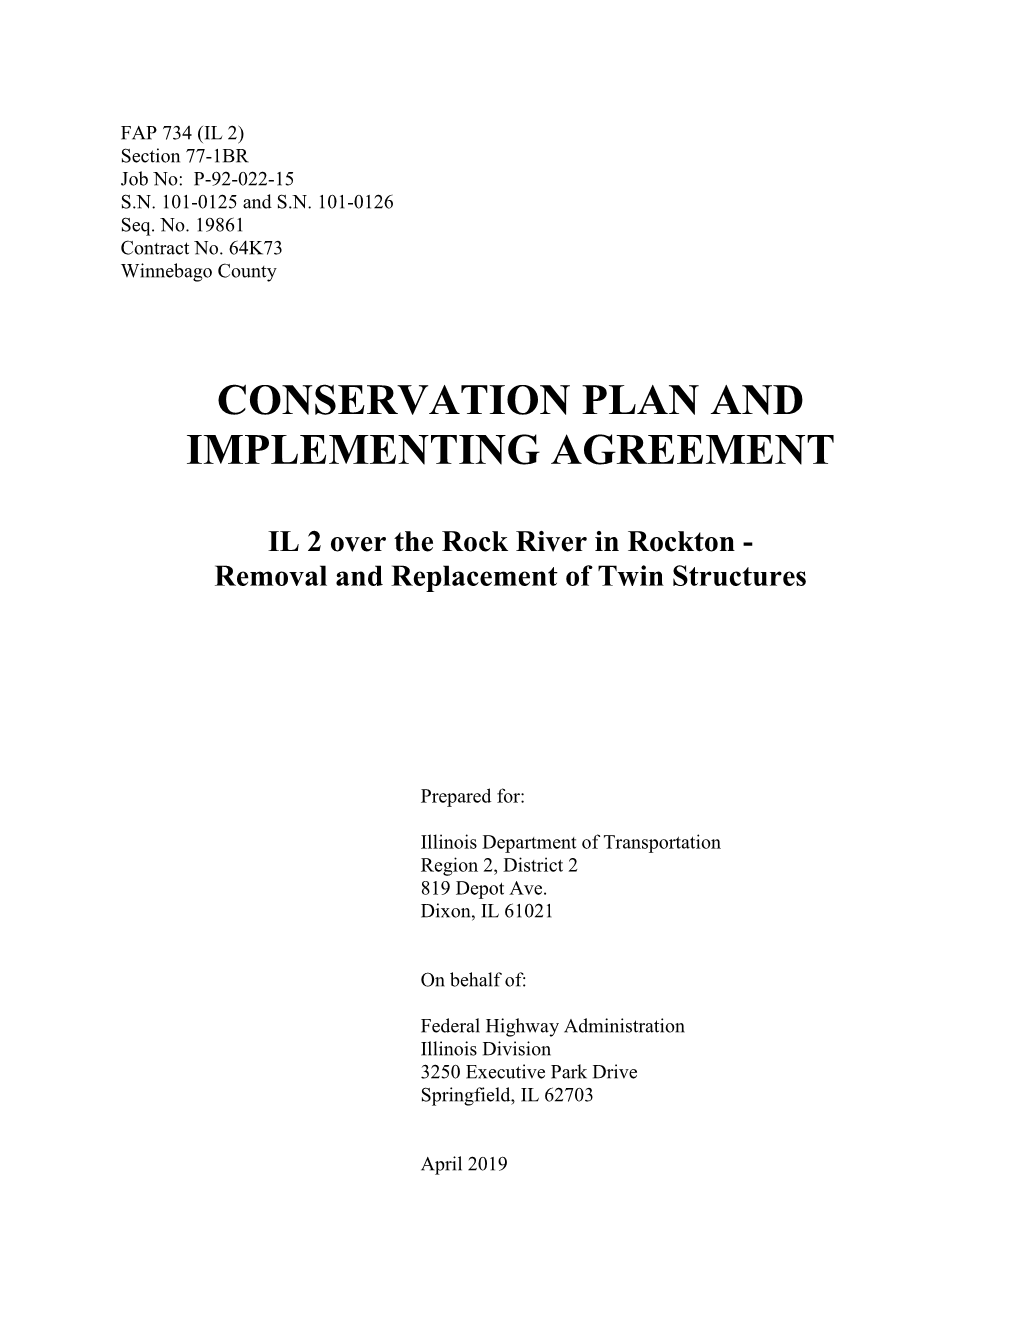 Conservation Plan and Implementing Agreement